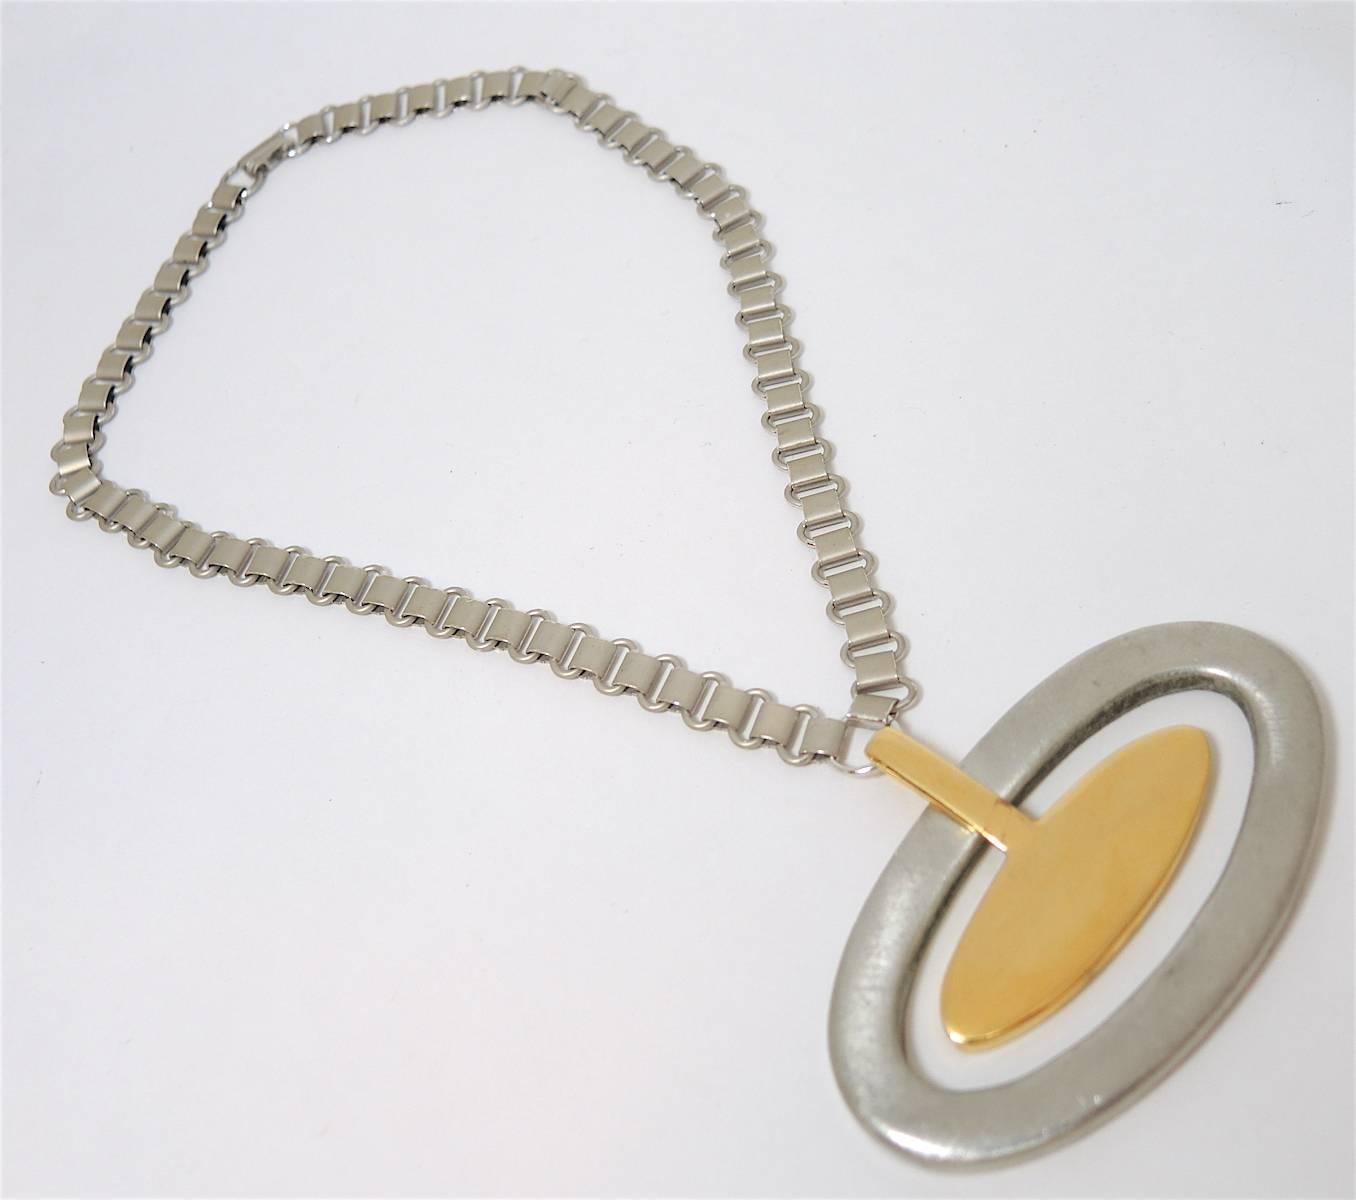 This necklace is just perfect. You can wear silver & gold together! It has a large pendant that is oval shaped with another pendant connected in the center. The necklace measures 16” x 1/4” and the pendant is 2” x 3”. This necklace has a fold over